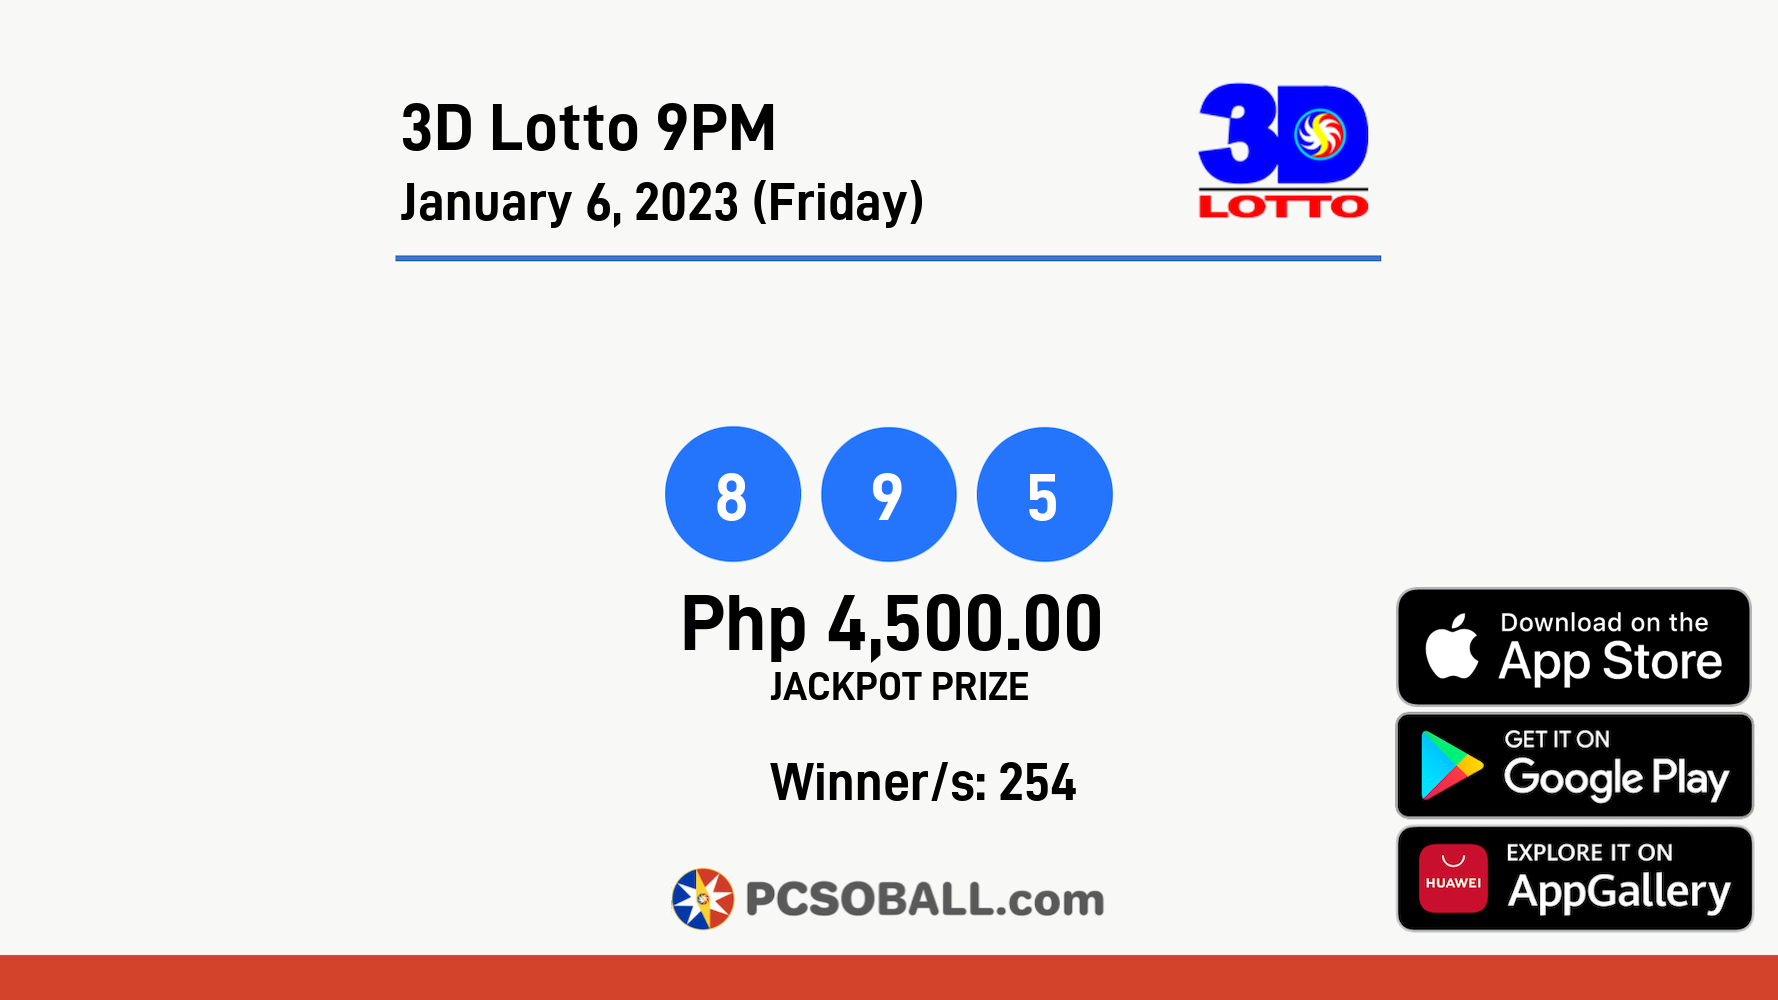 3D Lotto 9PM January 6, 2023 (Friday) Result